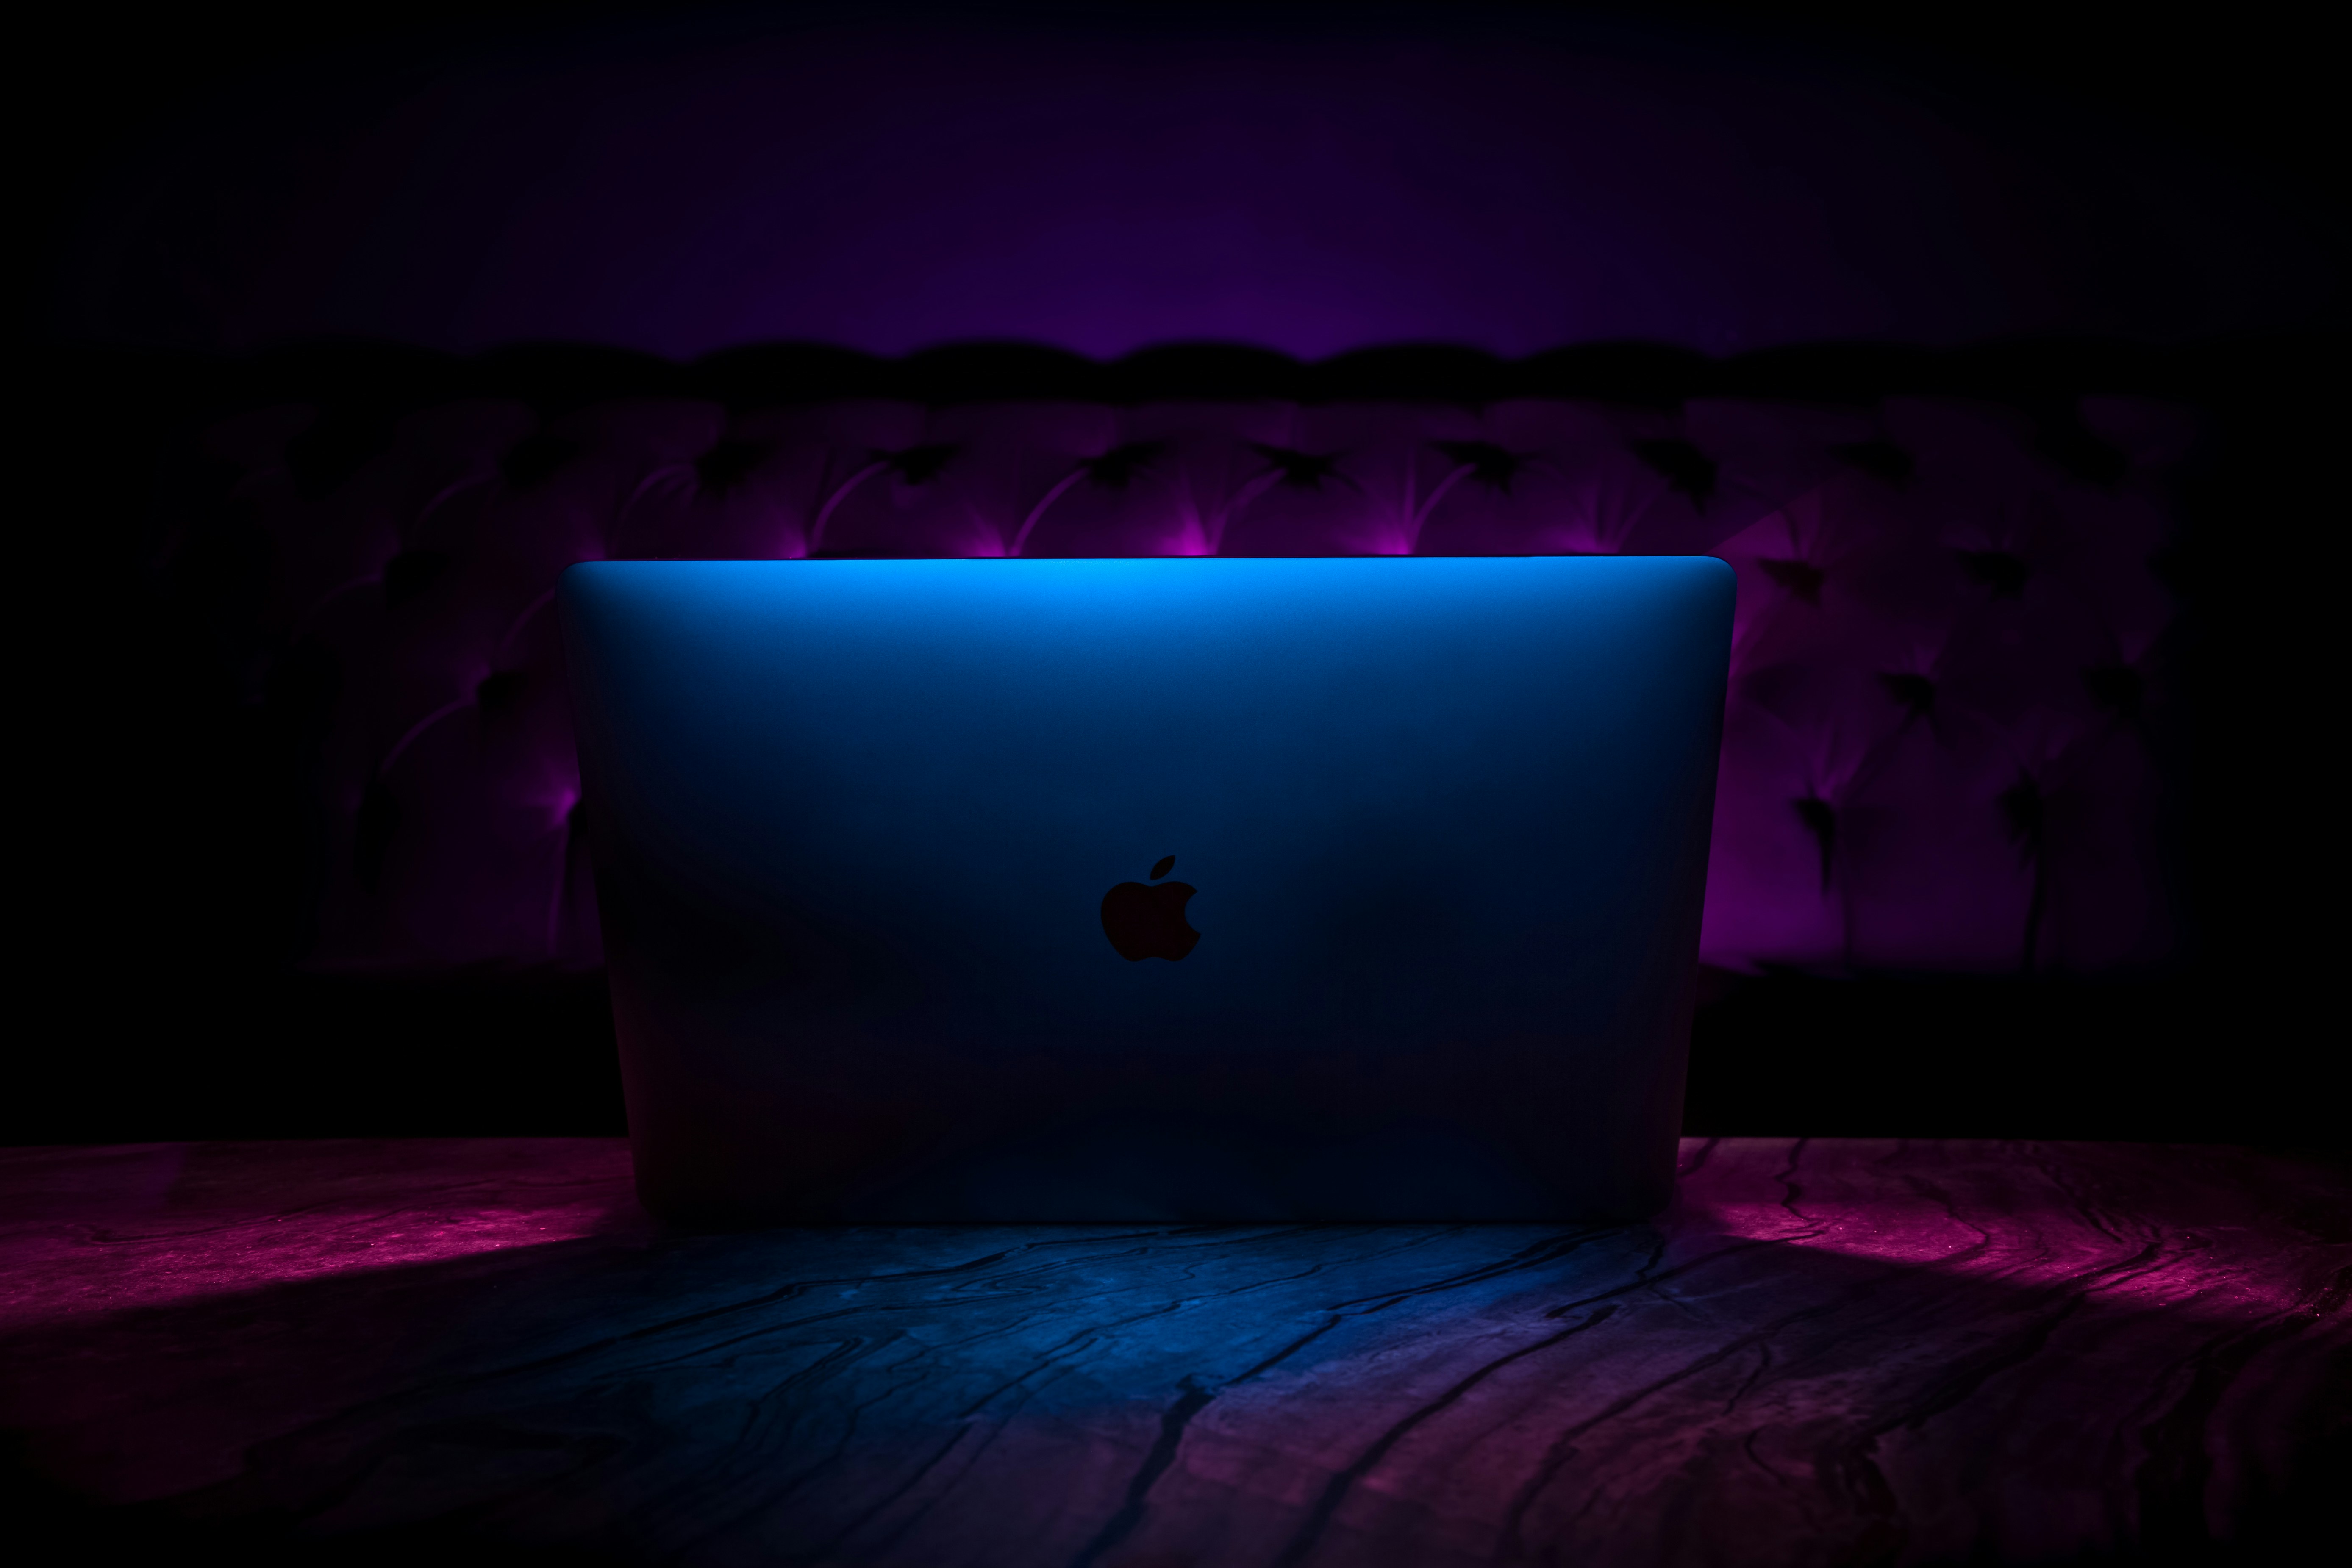 My MacBook Pro is being light painted by an RGB smartphone app for 8 seconds.